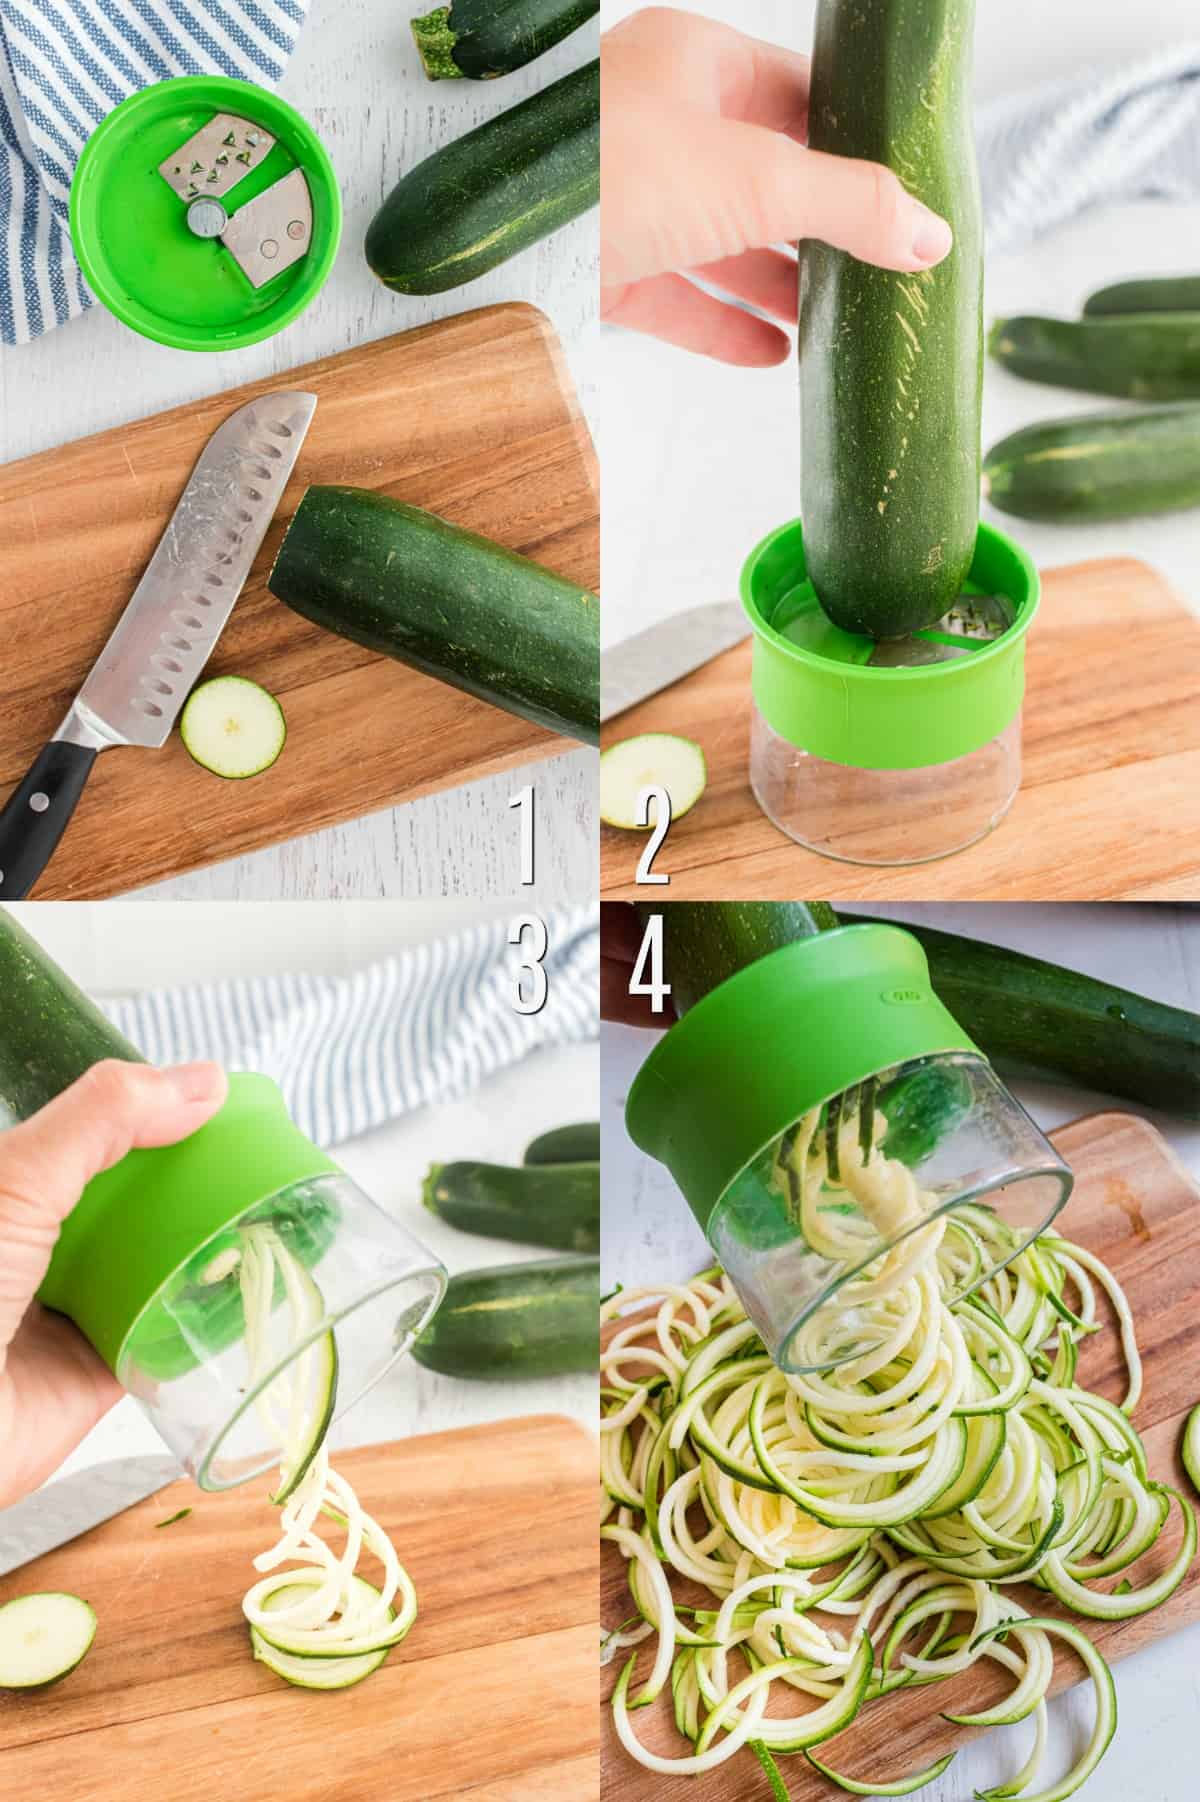 Step by step photos showing how to spiralize zucchini.